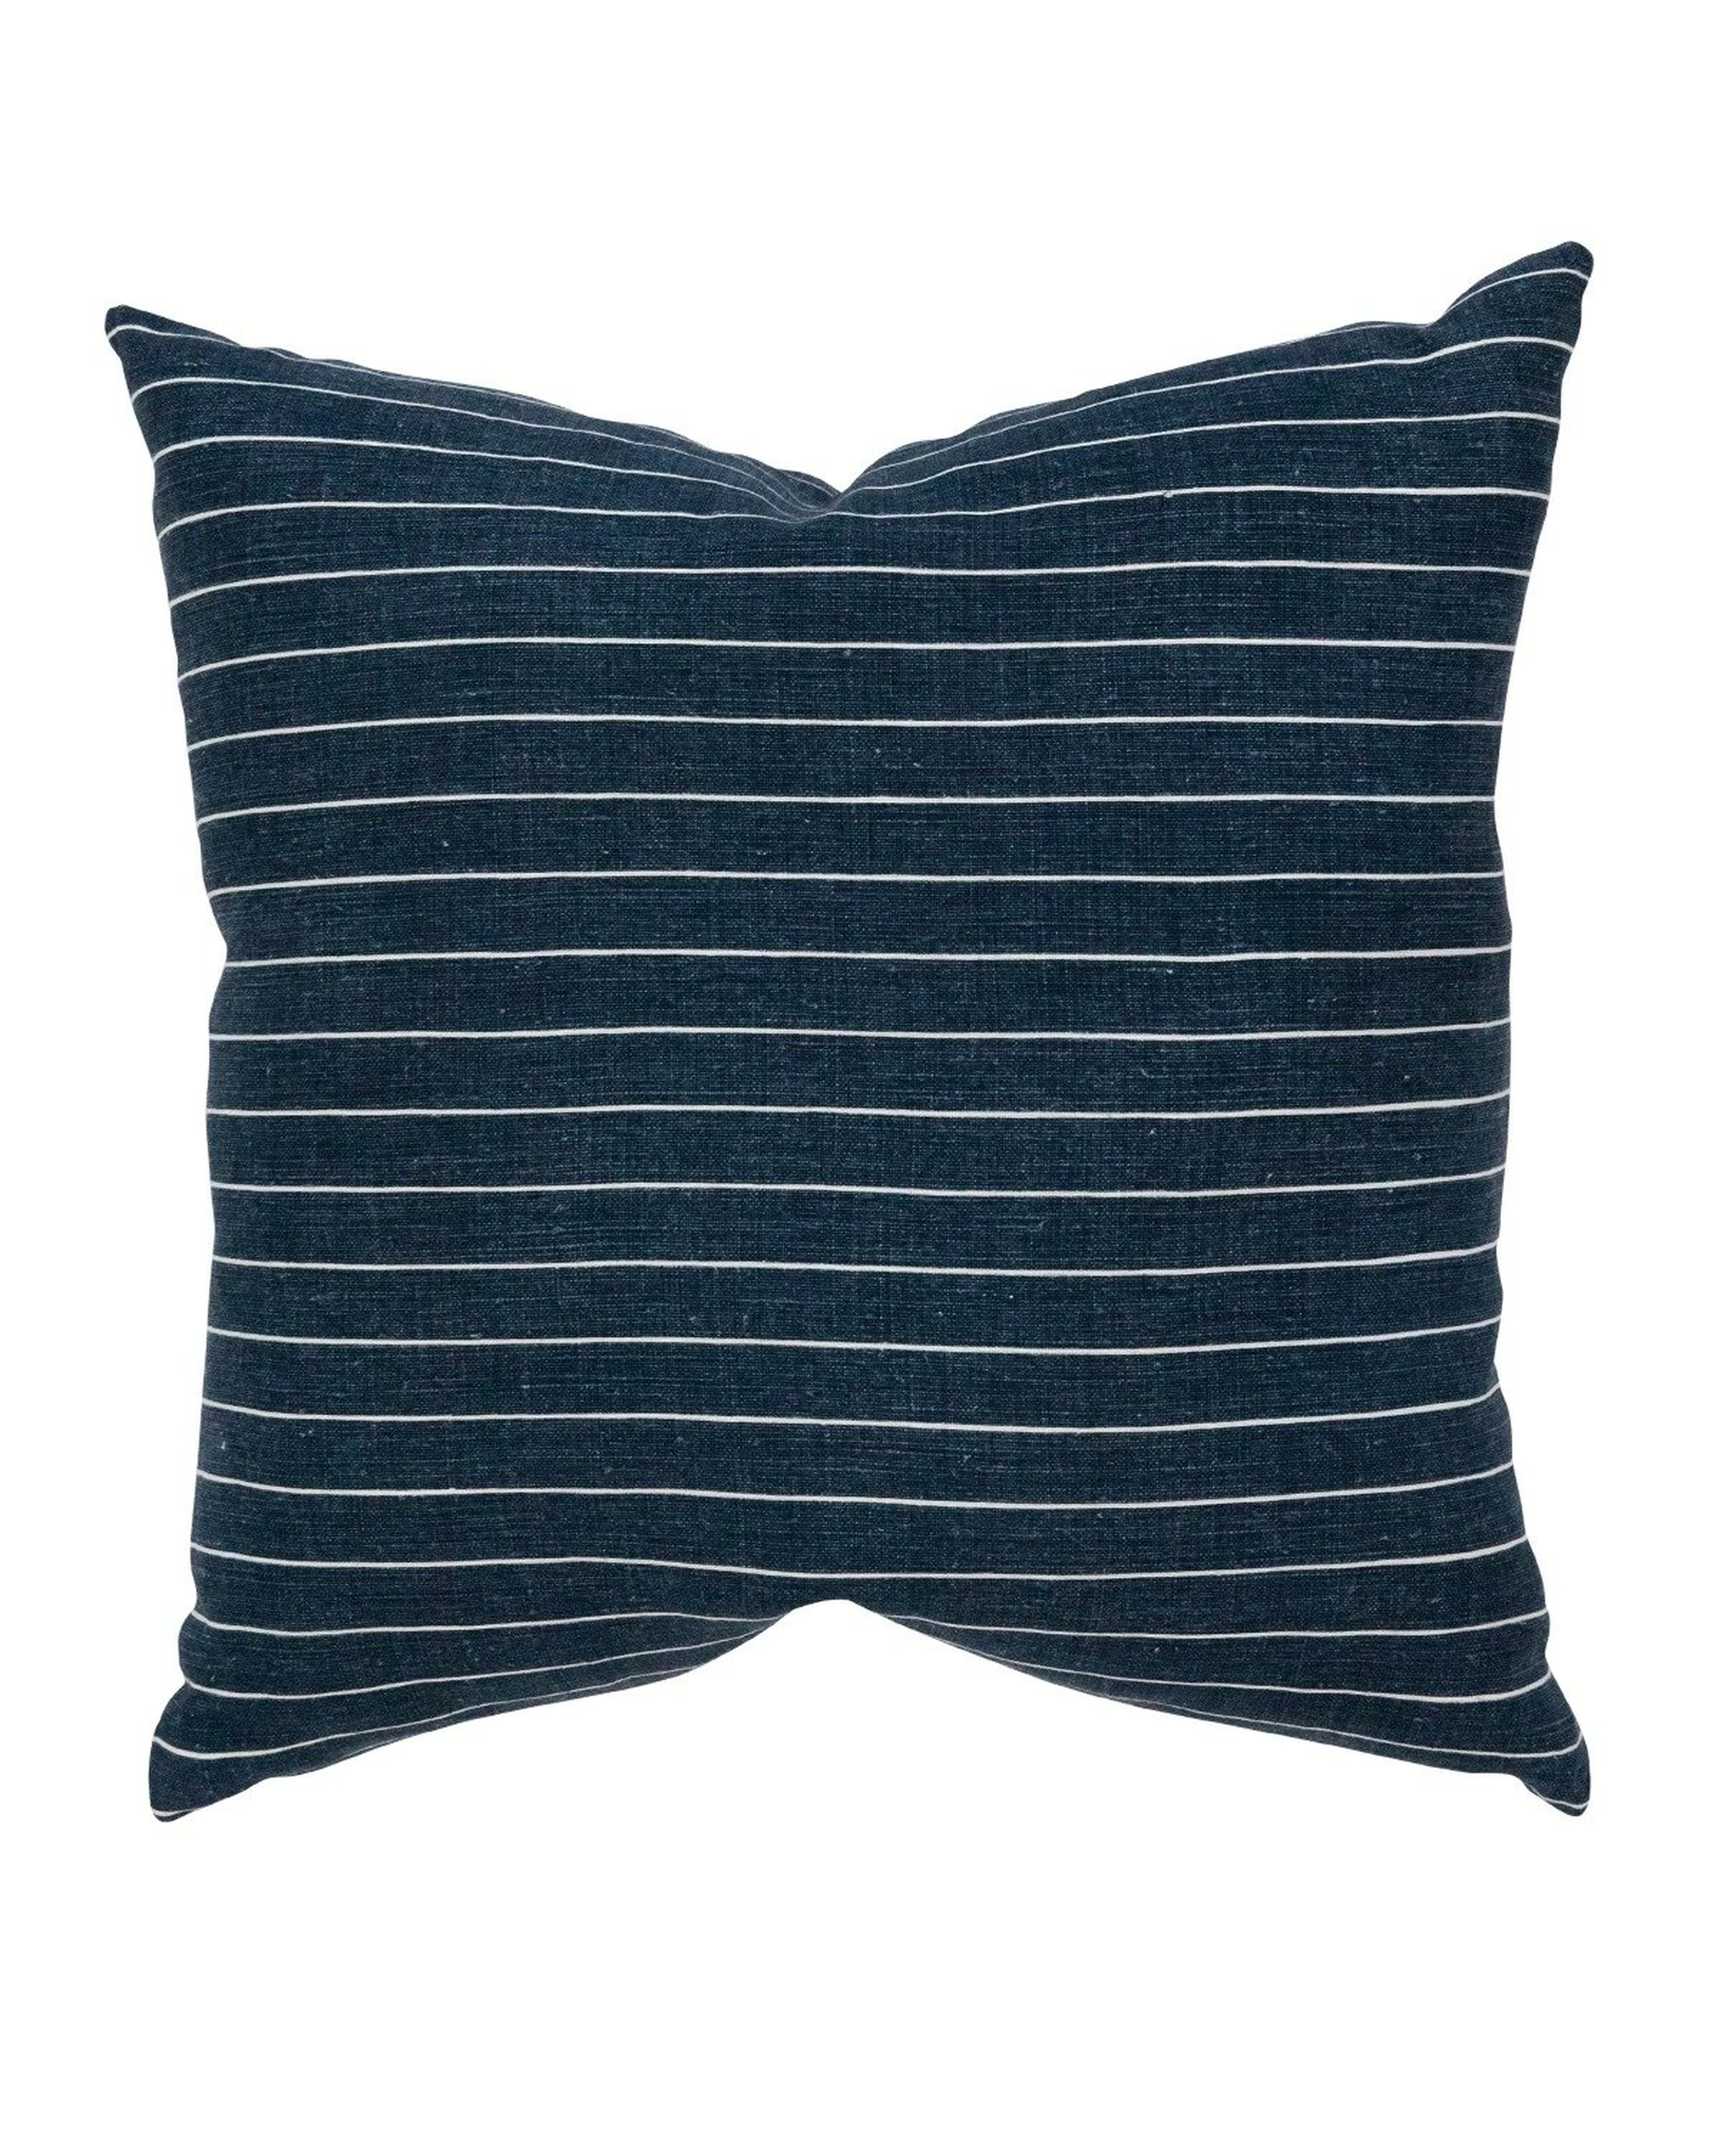 ALDON PILLOW WITH DOWN INSERT - NAVY - 22" x 22" - McGee & Co.